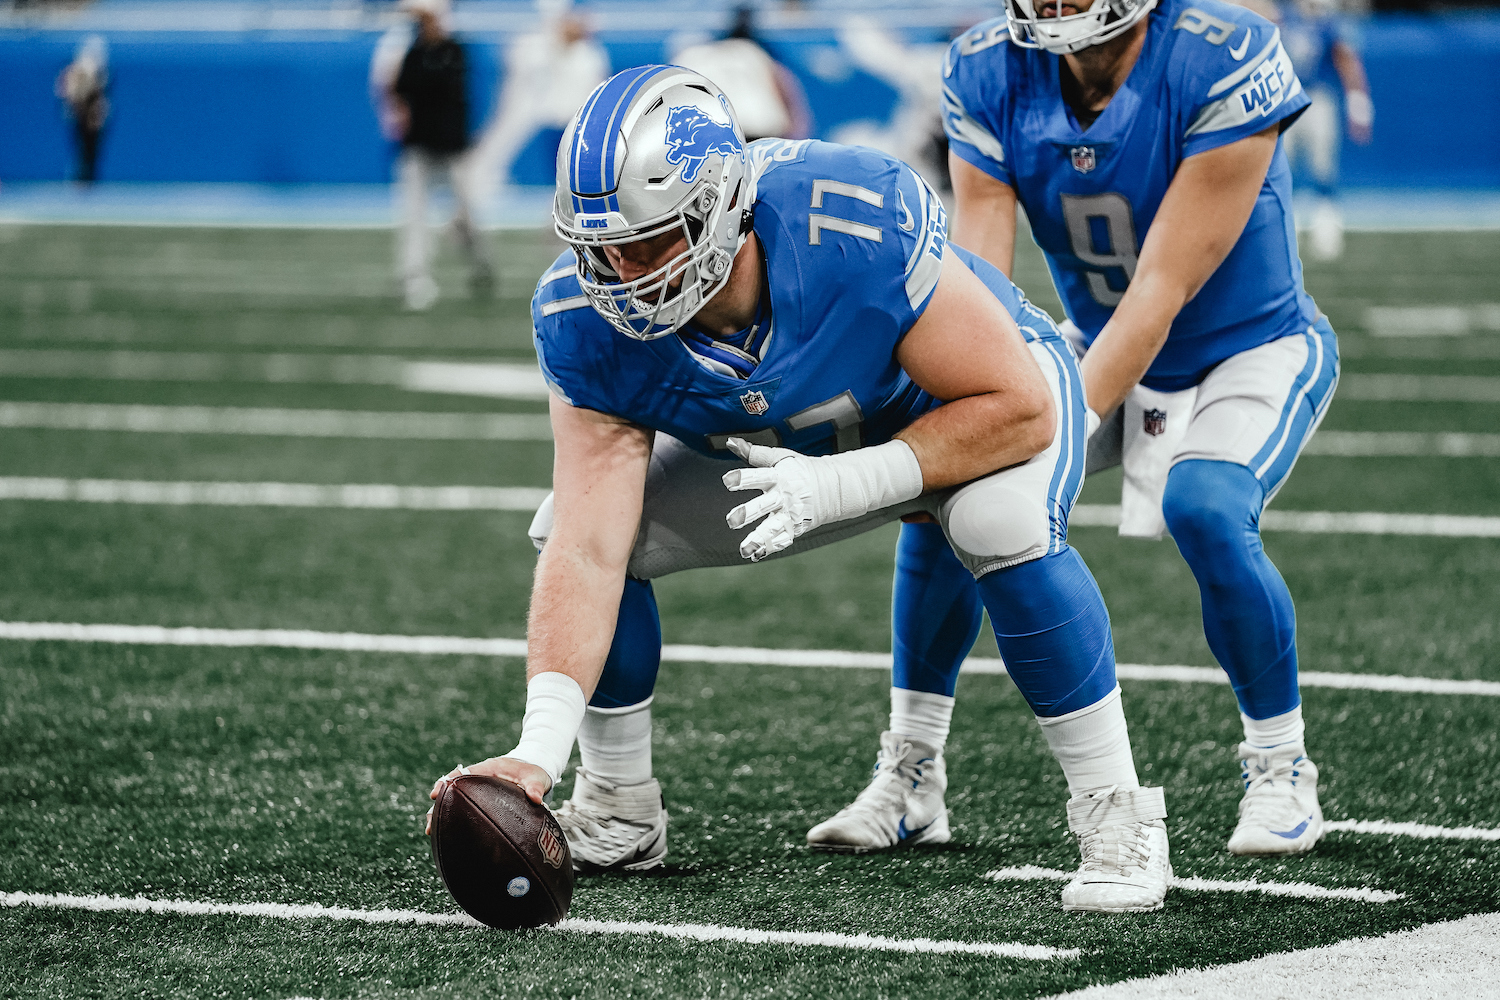 Detroit Lions' center Frank Ragnow is suited up and ready to snap the ball into play